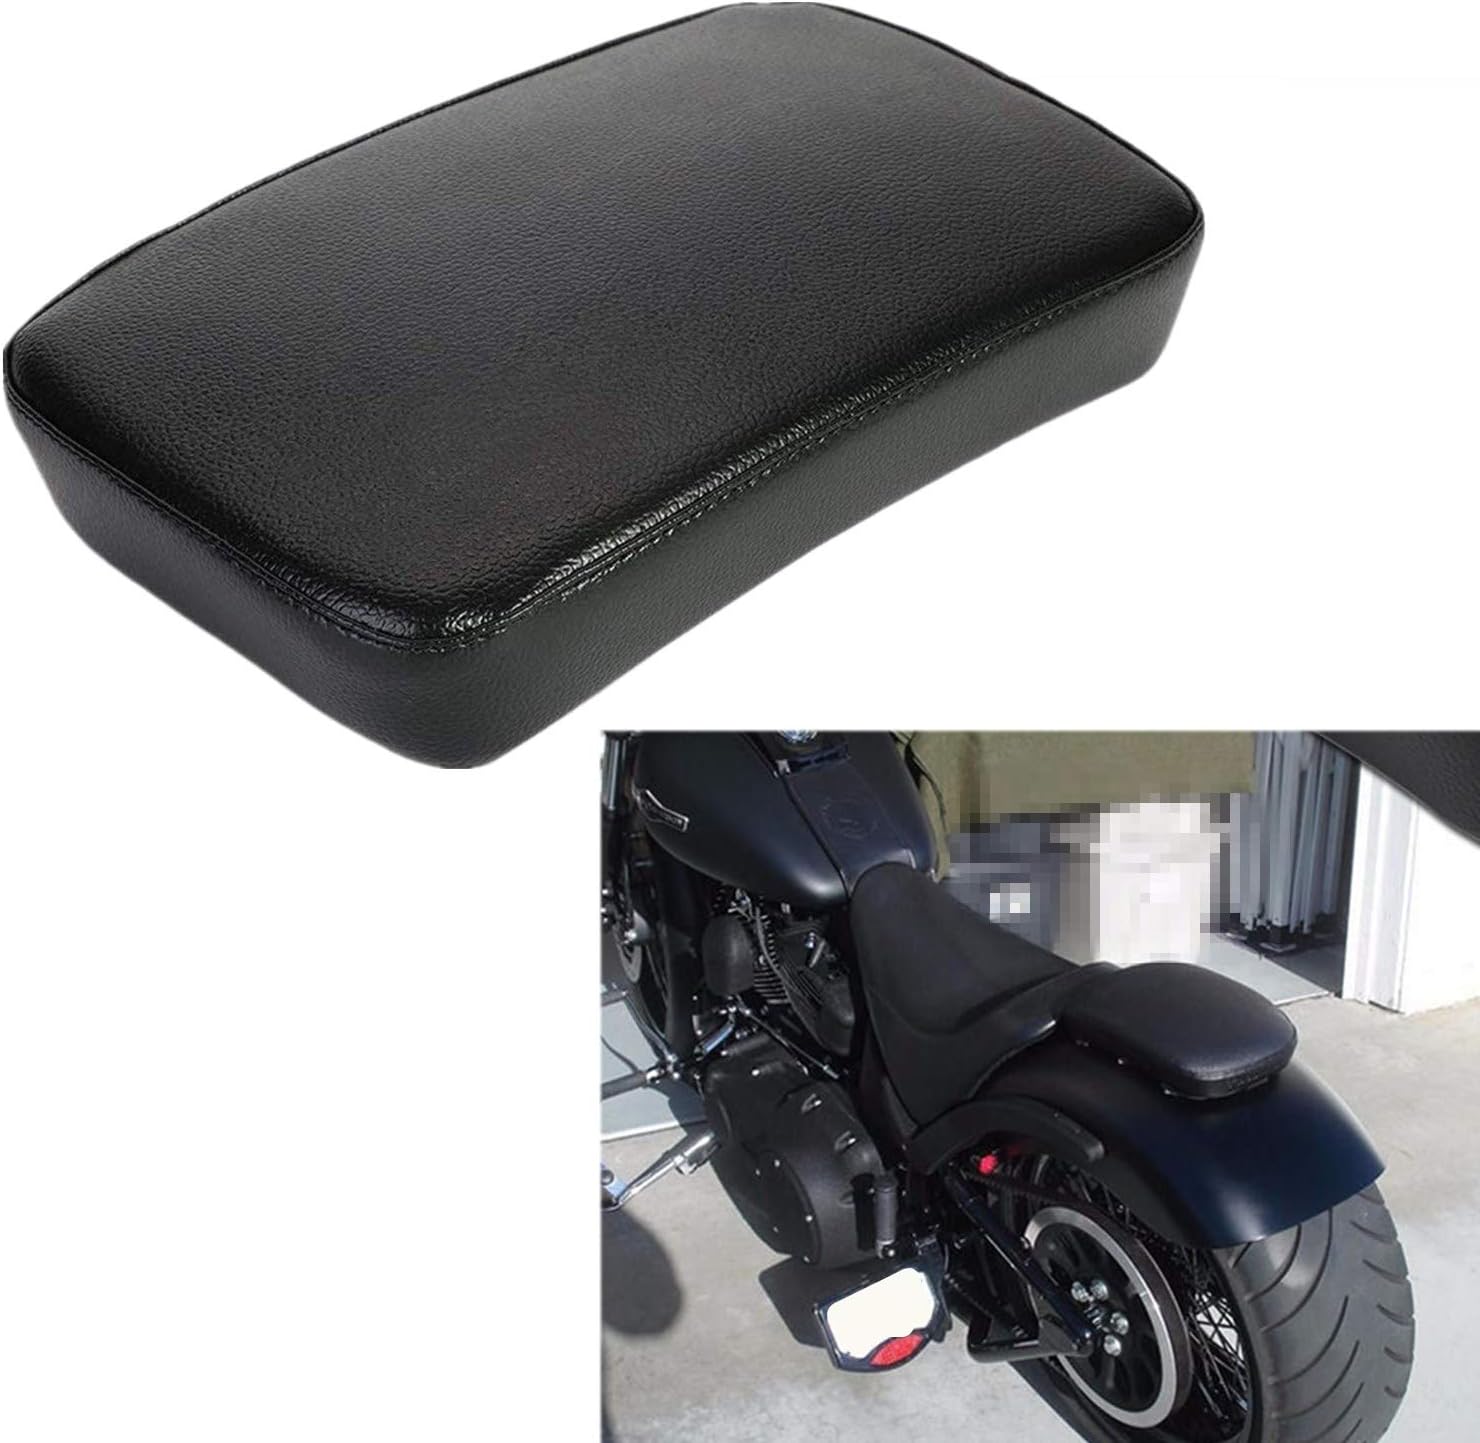 OSAN Leather Pillion Pad 6 Suction Cup Rear Passenger Seat for Harley Custom Bikes - OSAN Leather Pillion Pad Review